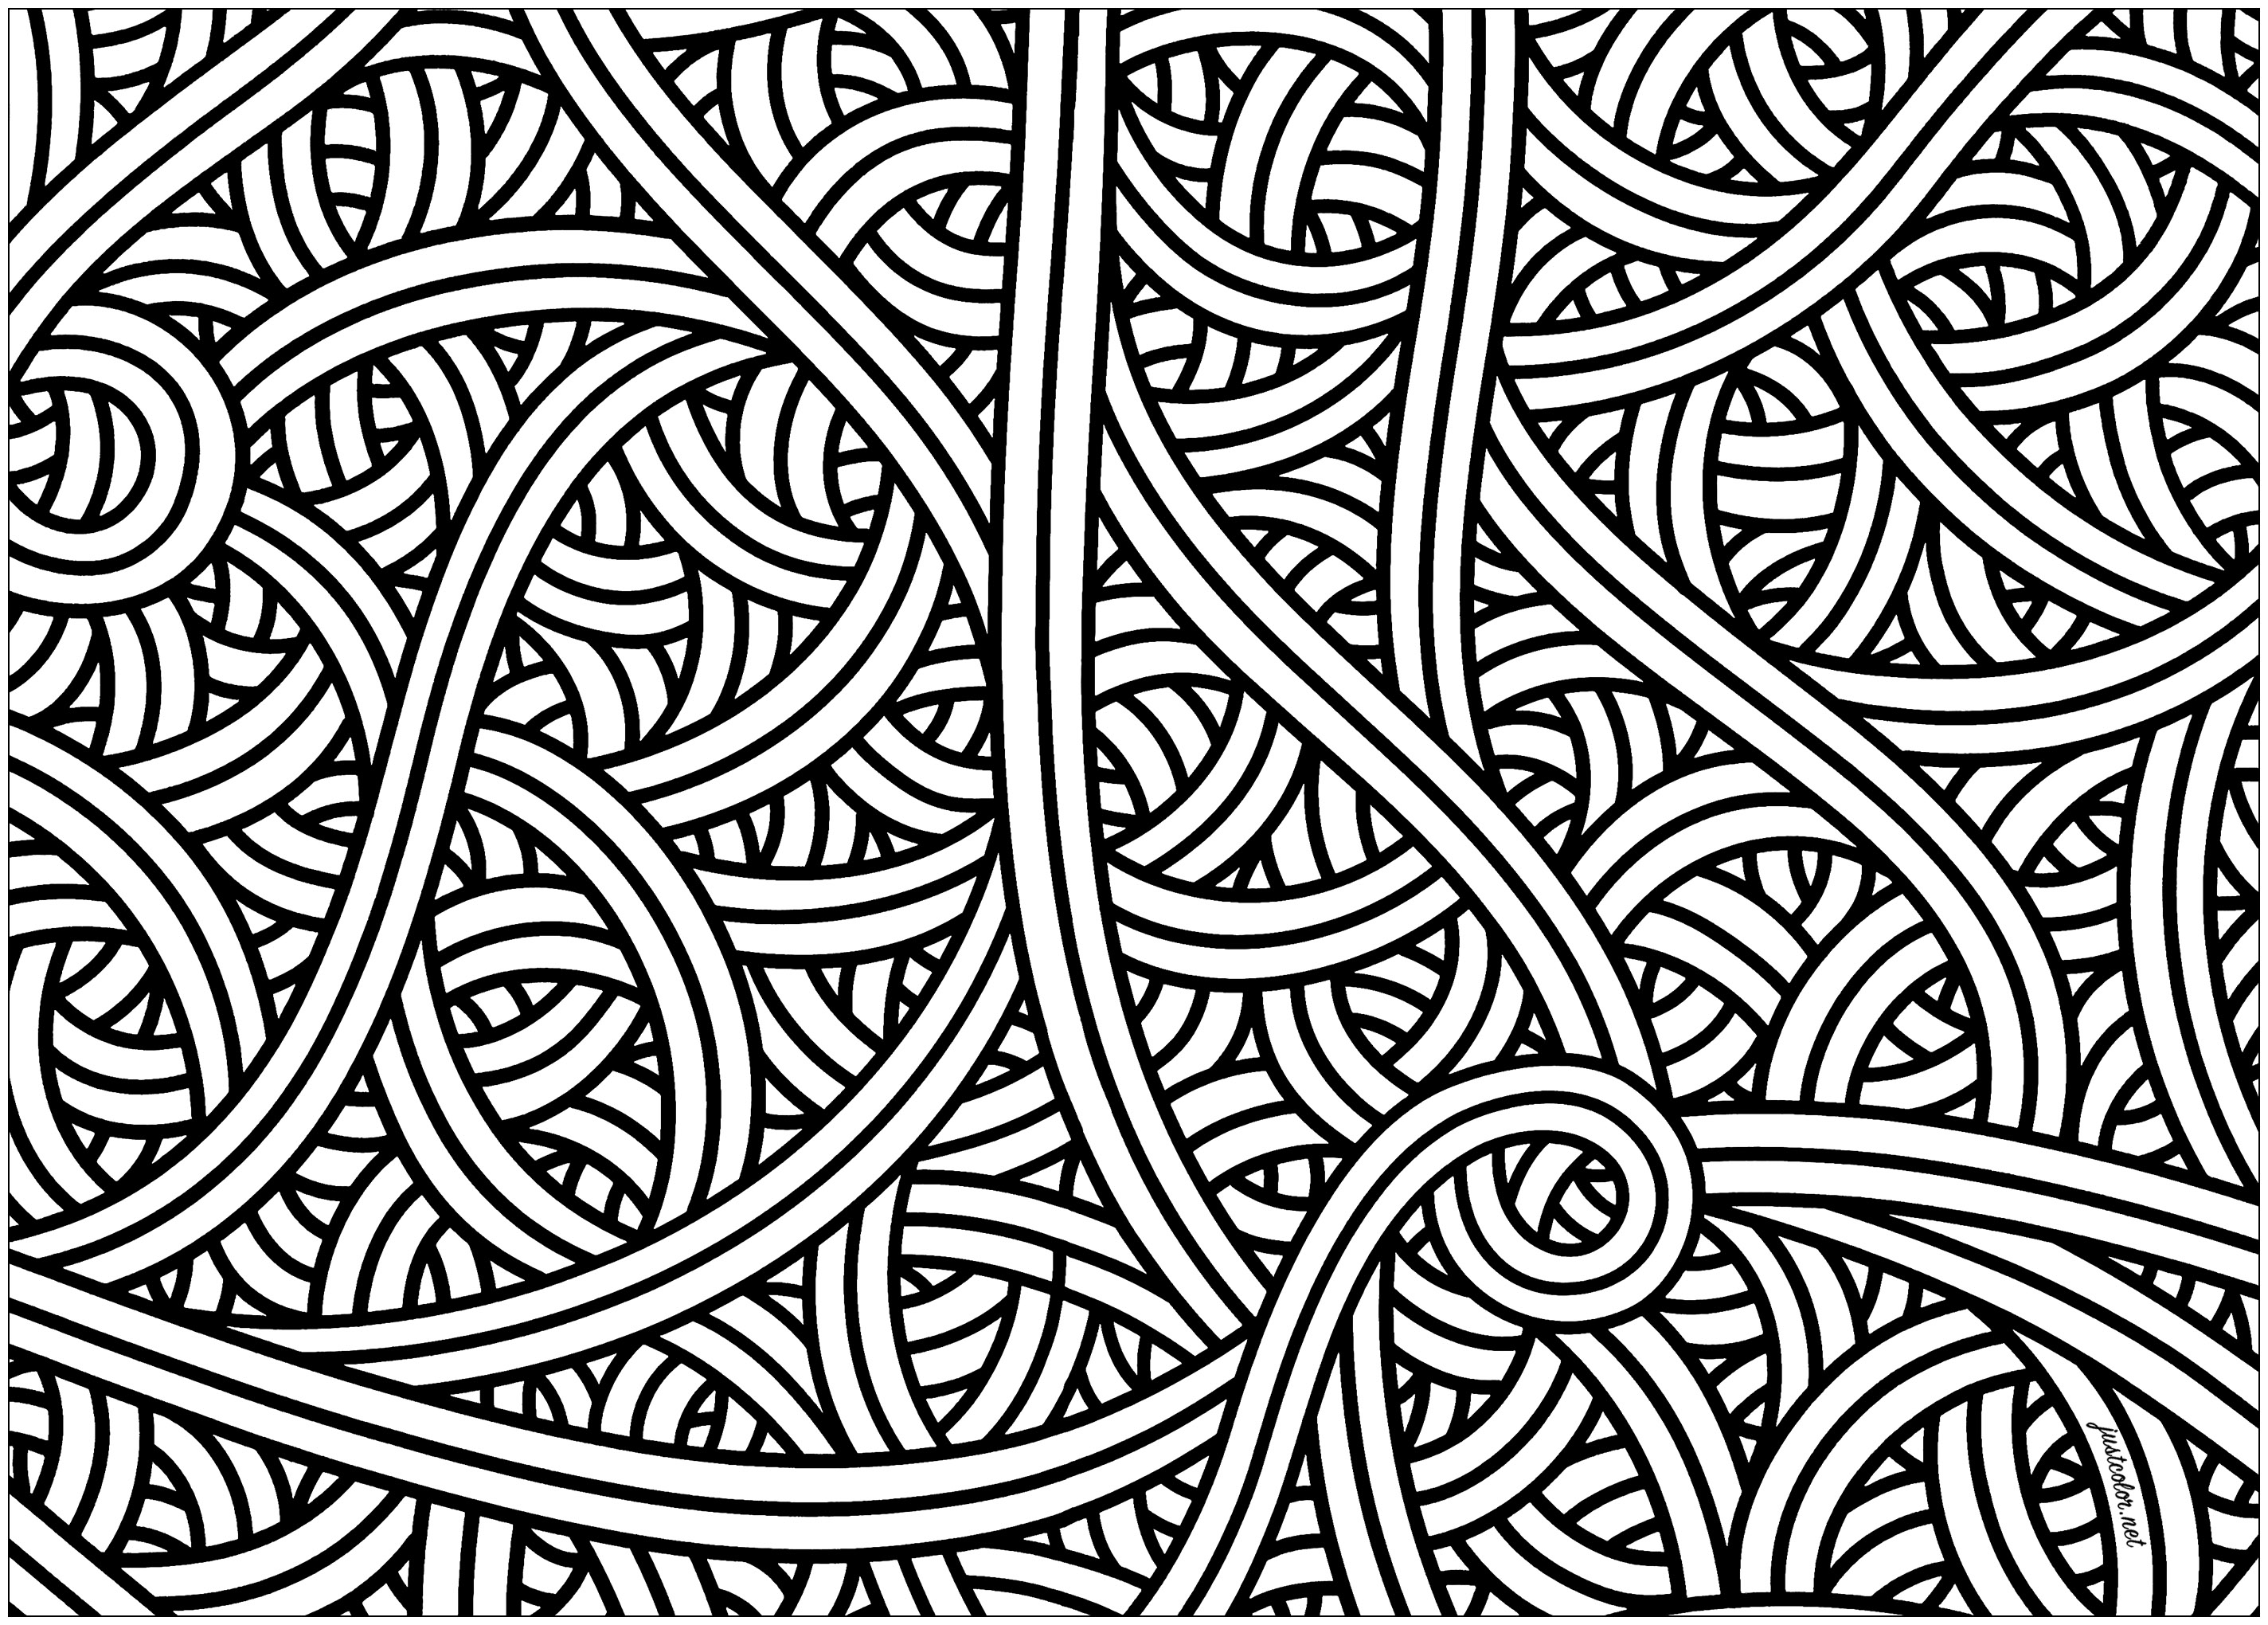 Coloring page with numerous intertwined lines. Perfect to give you an intense moment of relaxation !